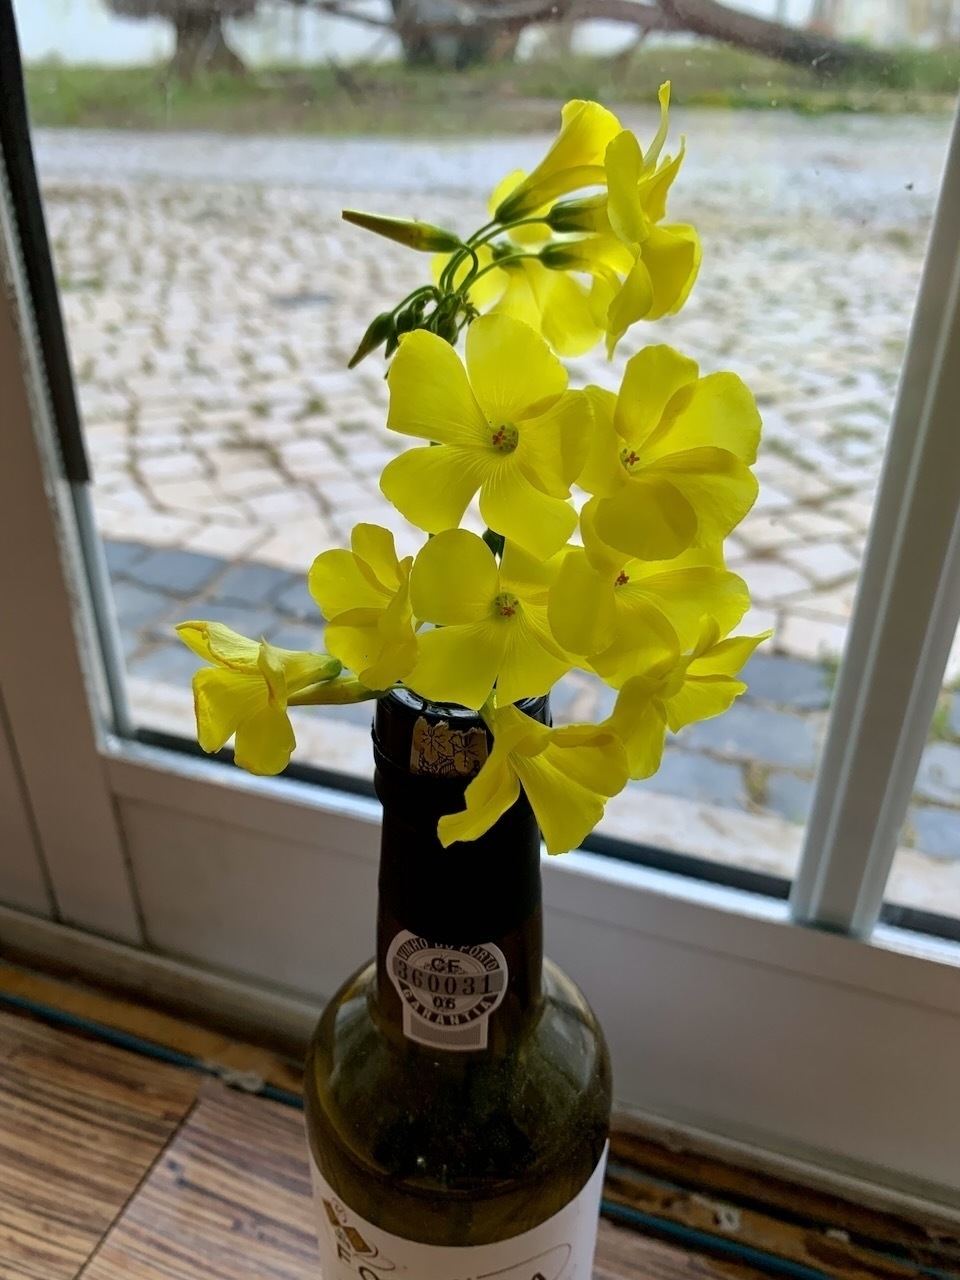 Yellow flowers in a Port bottle, next to glass-paned patio doors.